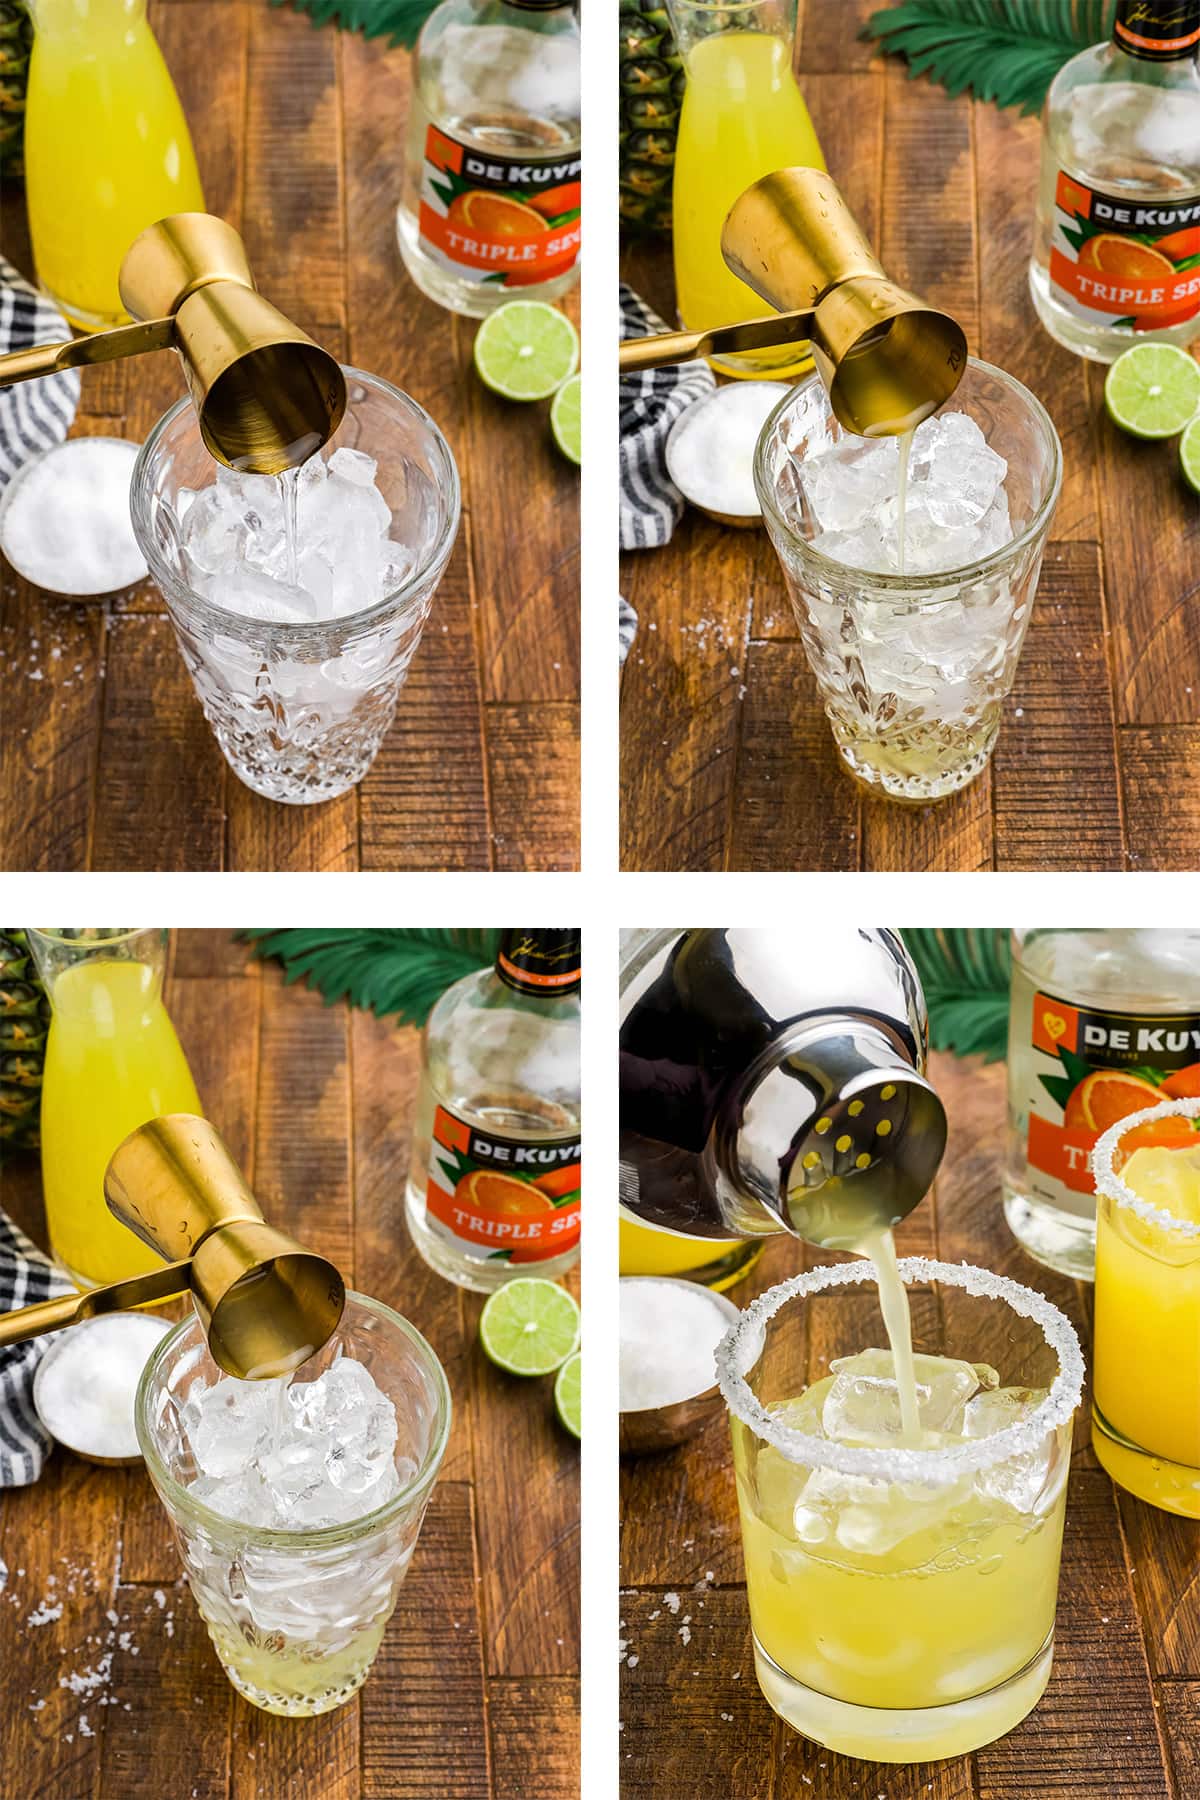 Images of a jigger pouring margarita ingredients into a cocktail glass.